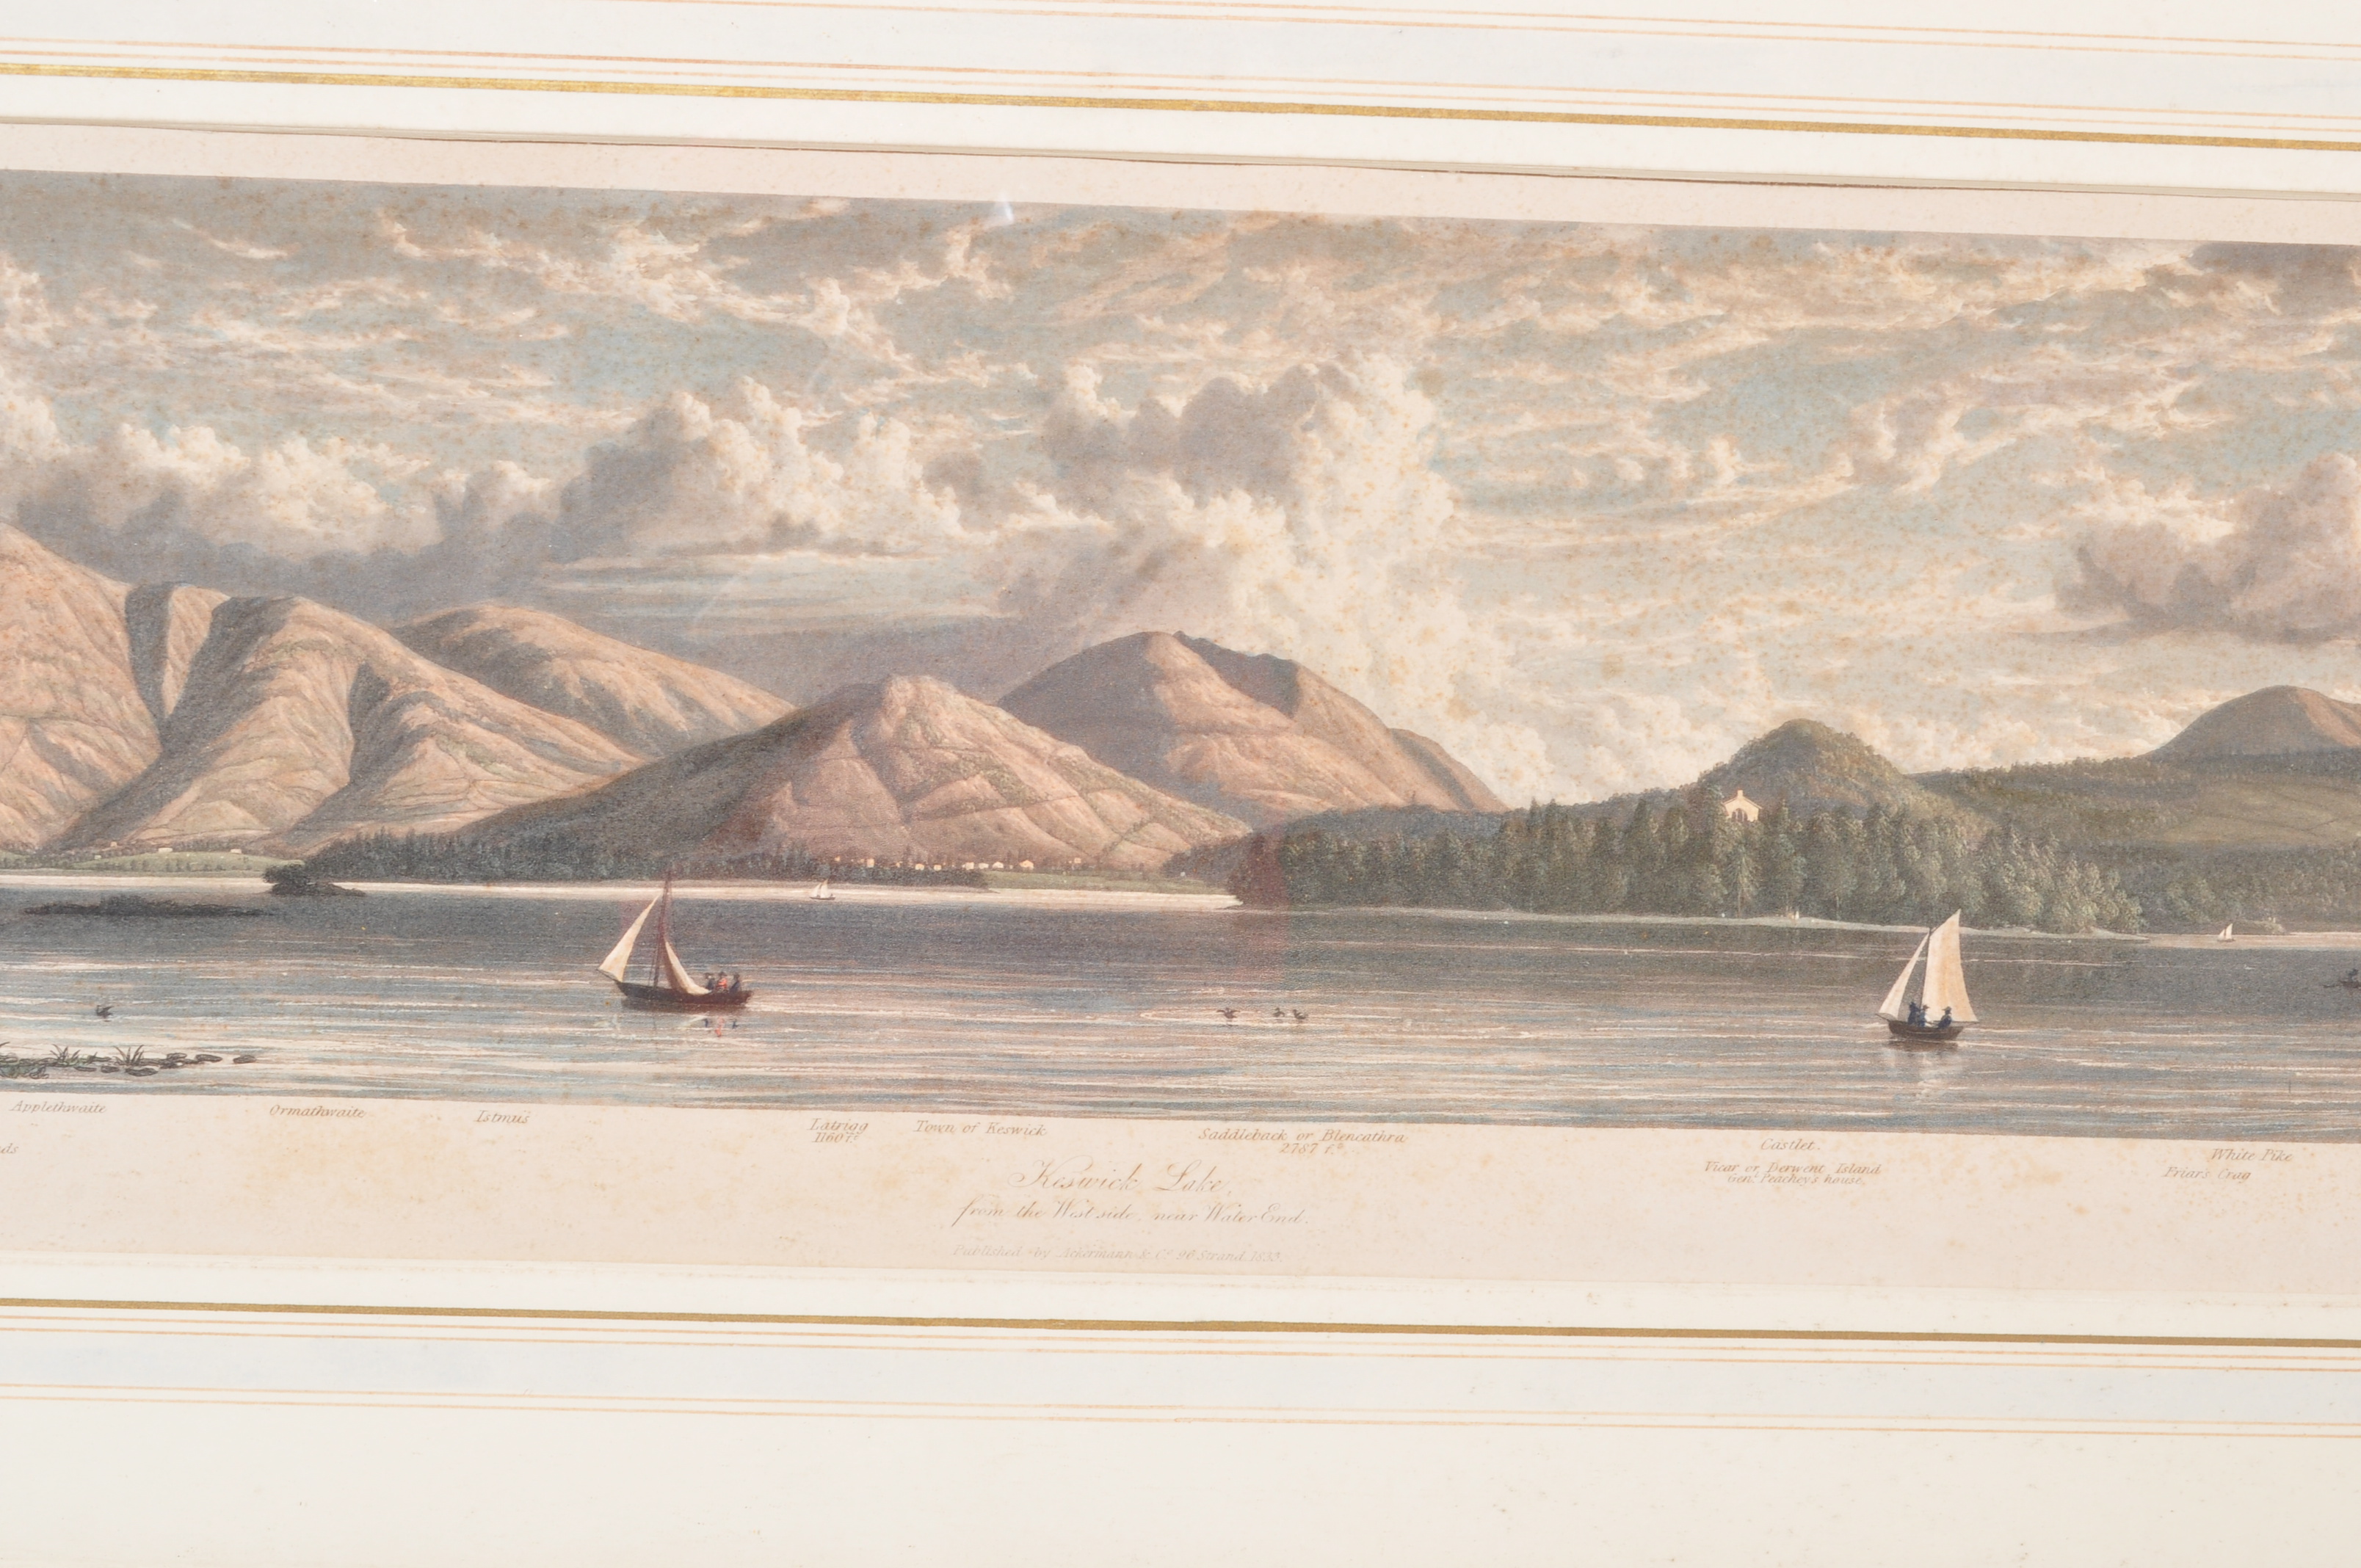 W WESTALL THREE 19TH CENTURY COLOUR ENGRAVINGS OF LAKE DISTRICT - Image 10 of 11